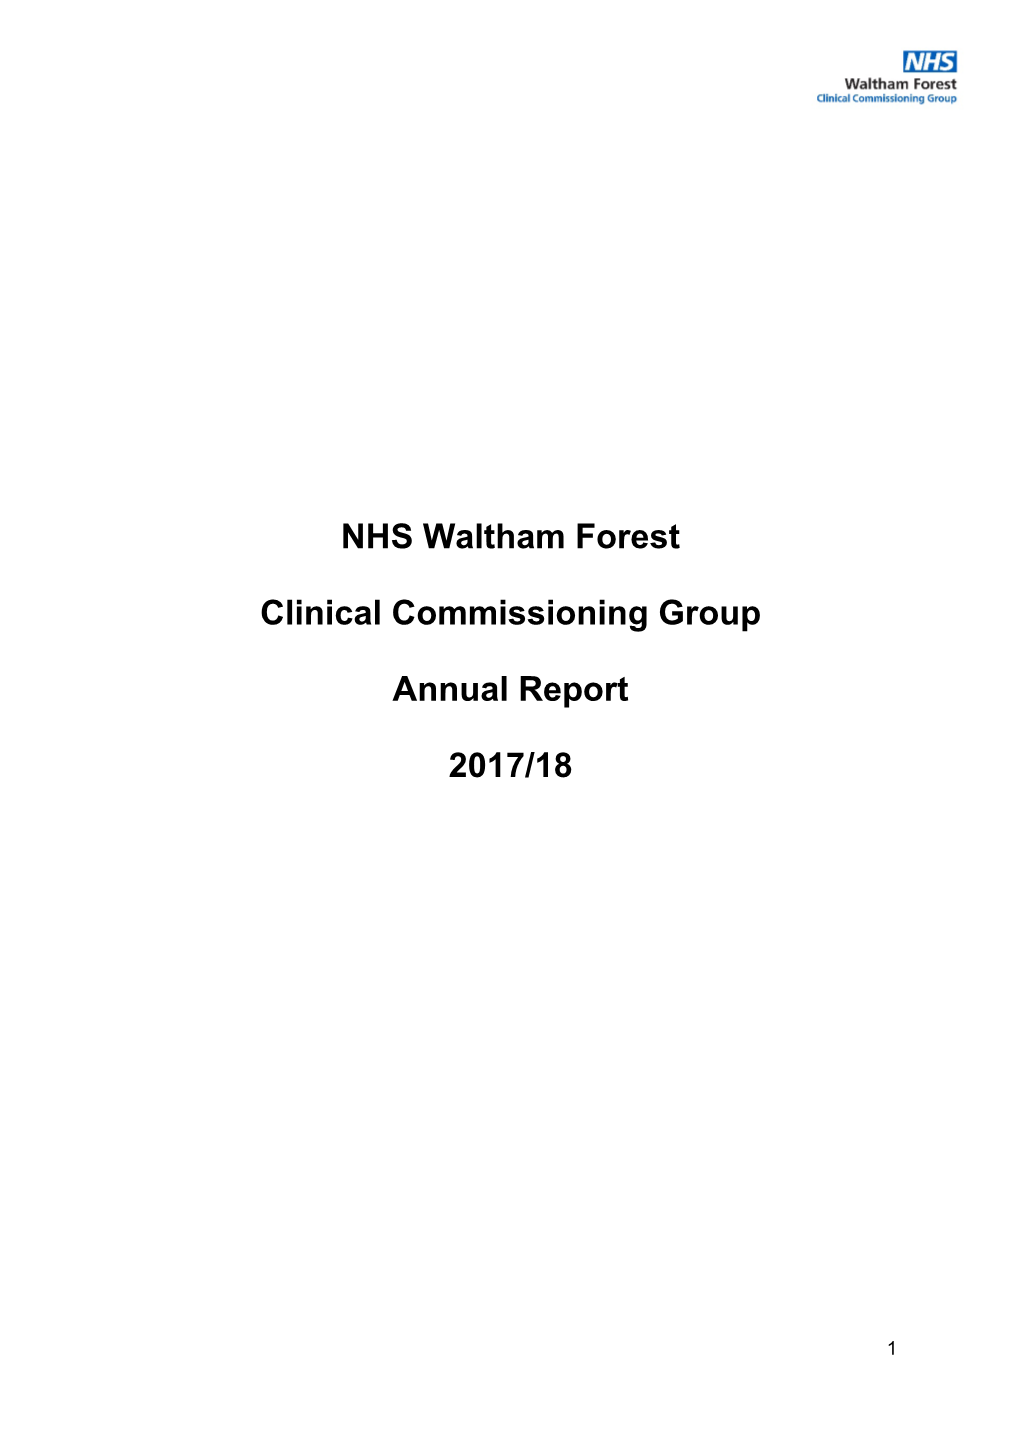 NHS Waltham Forest CCG Annual Report 2017-18